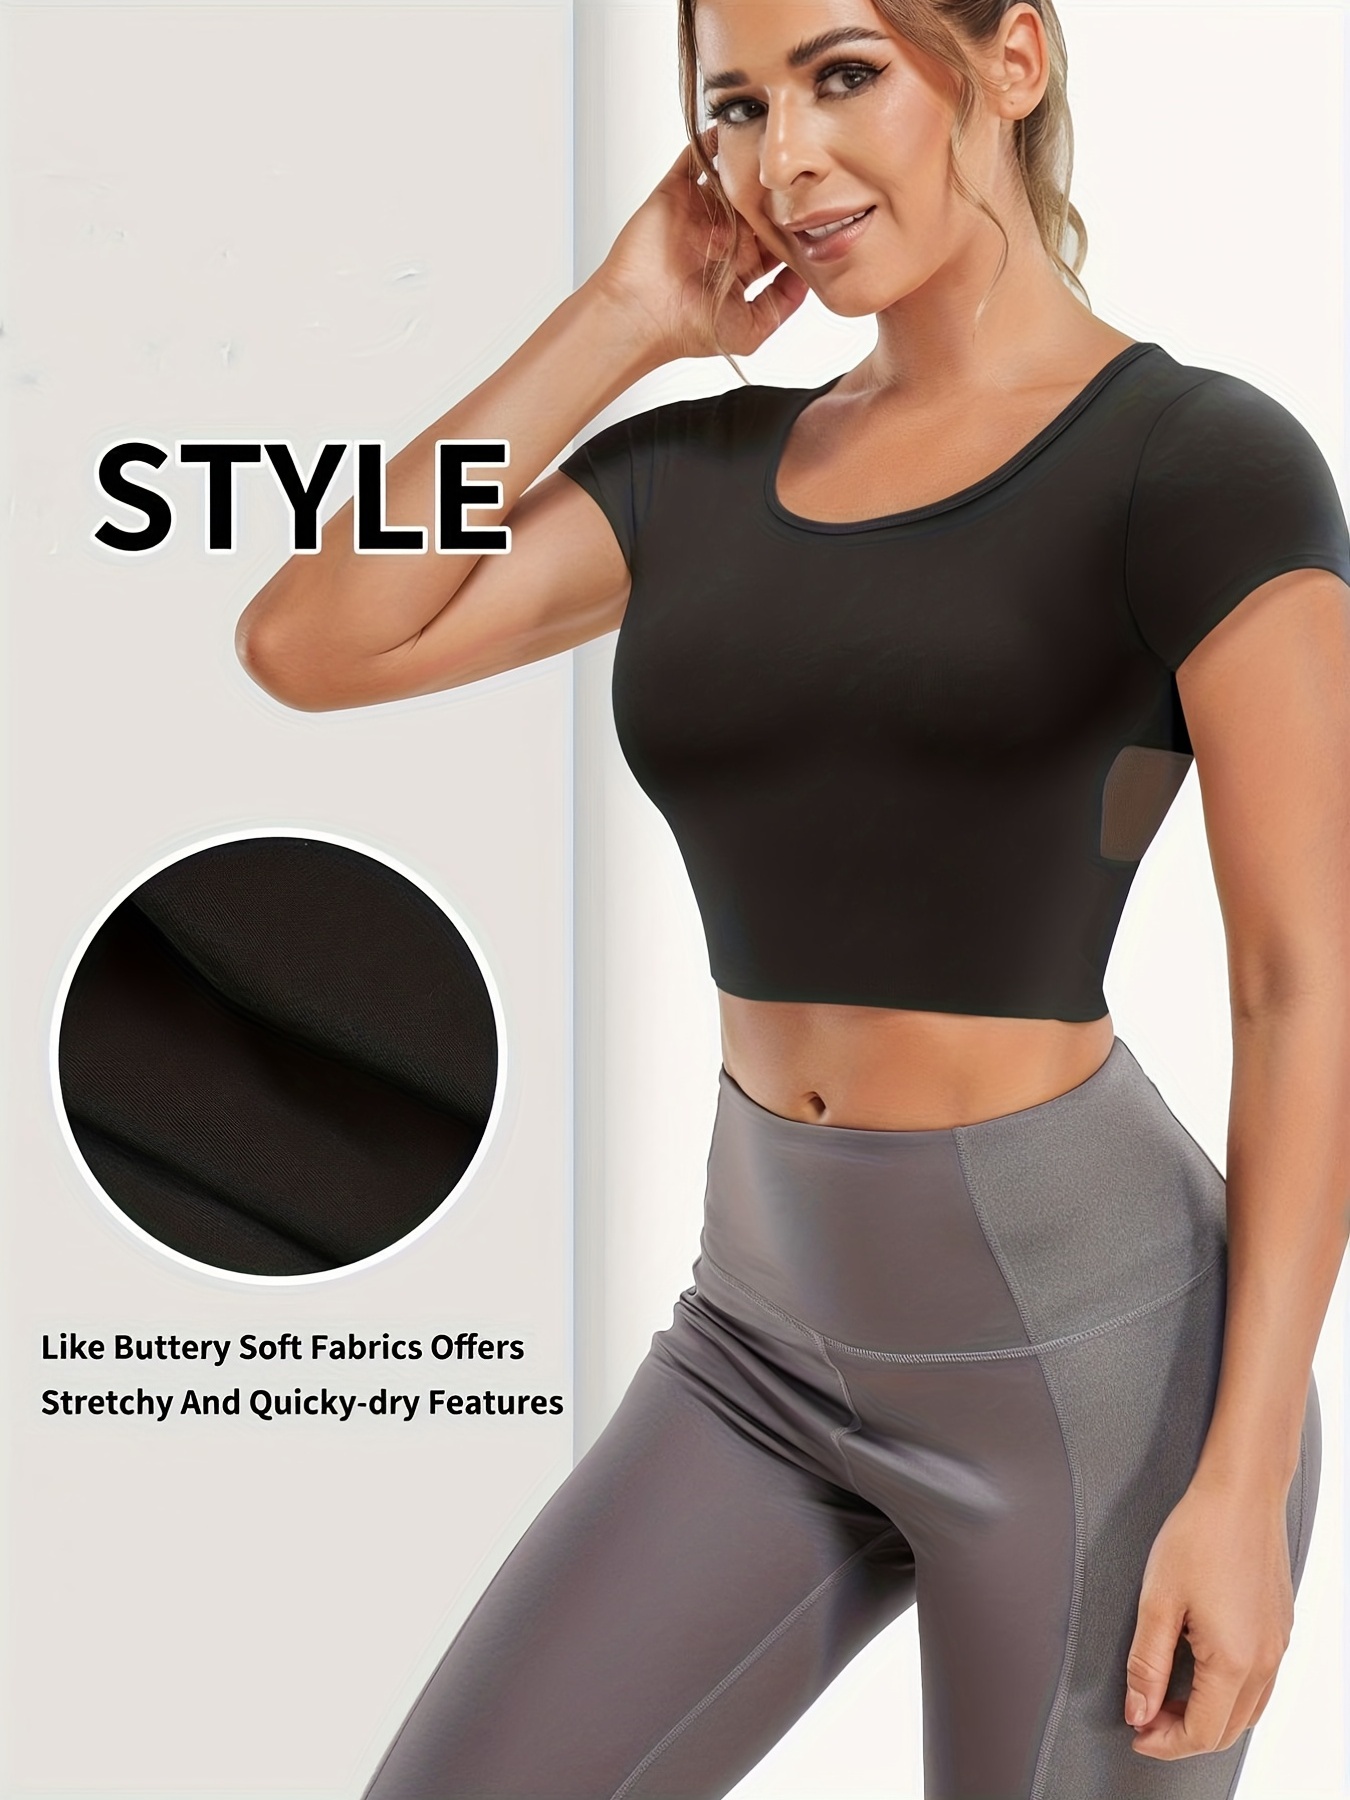 Women Cutout Workout Tops 3/4 Sleeves Scoop Neck Cross Back Yoga Shirts  Slim Fit Gym Running Athletic Shirts Womens Clothes